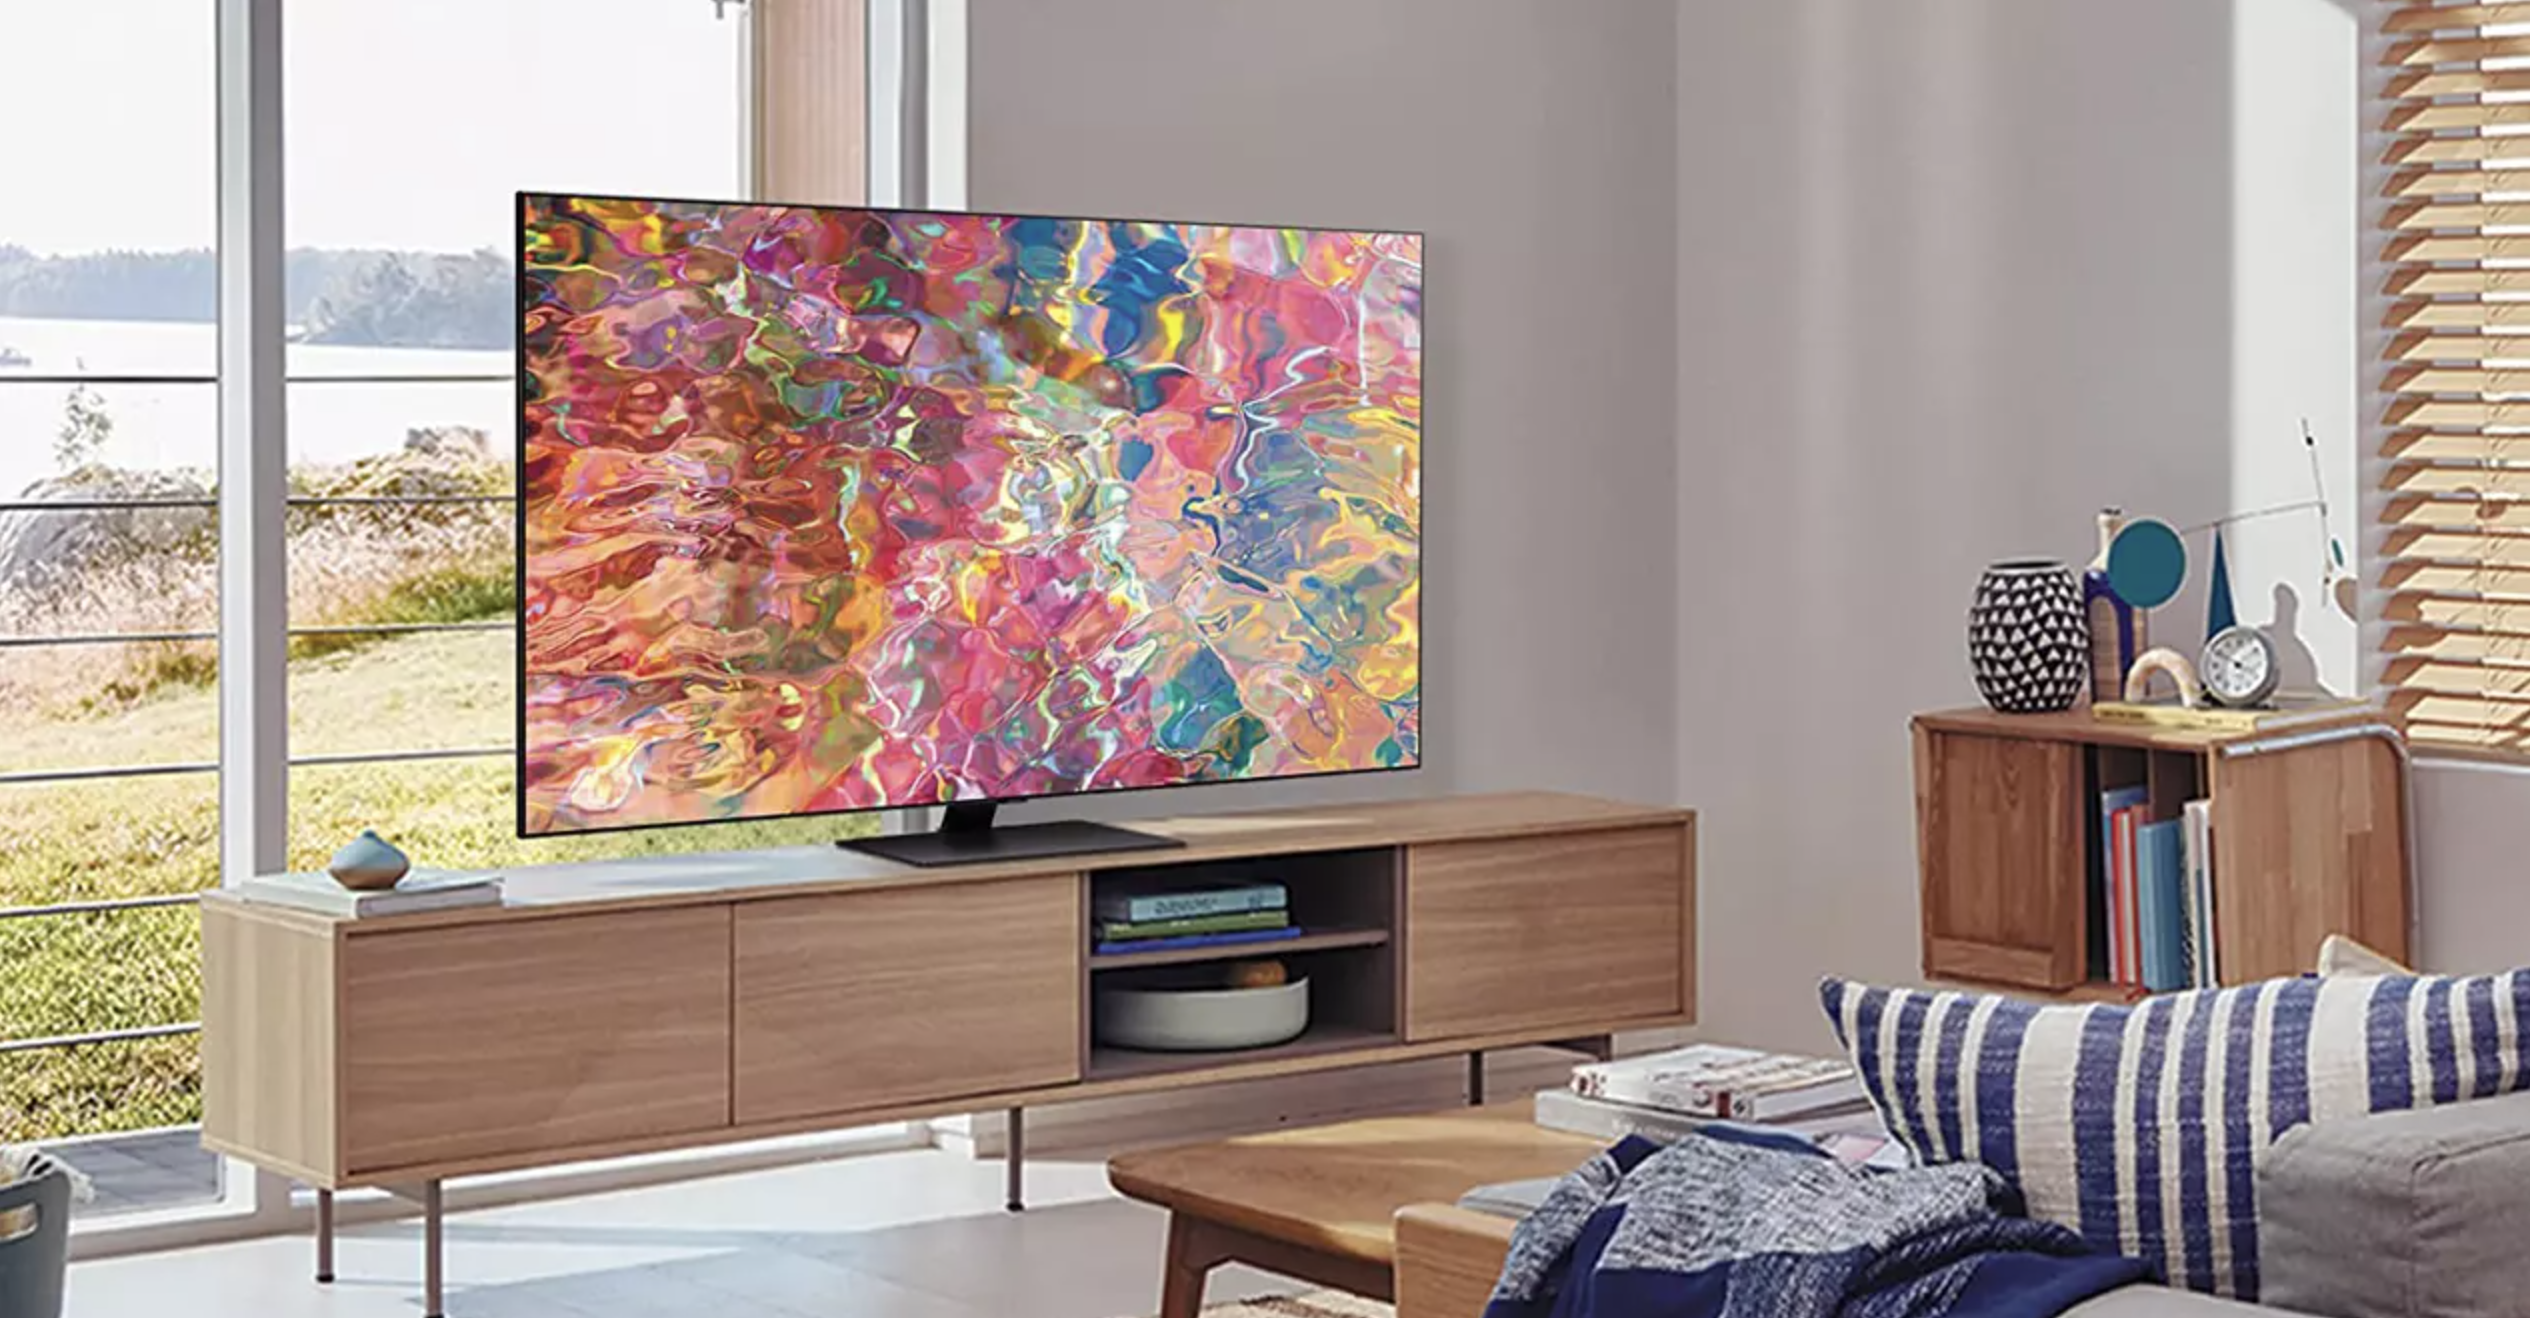 the Samsung 50Q80B tv pictured in a brightly lit living room